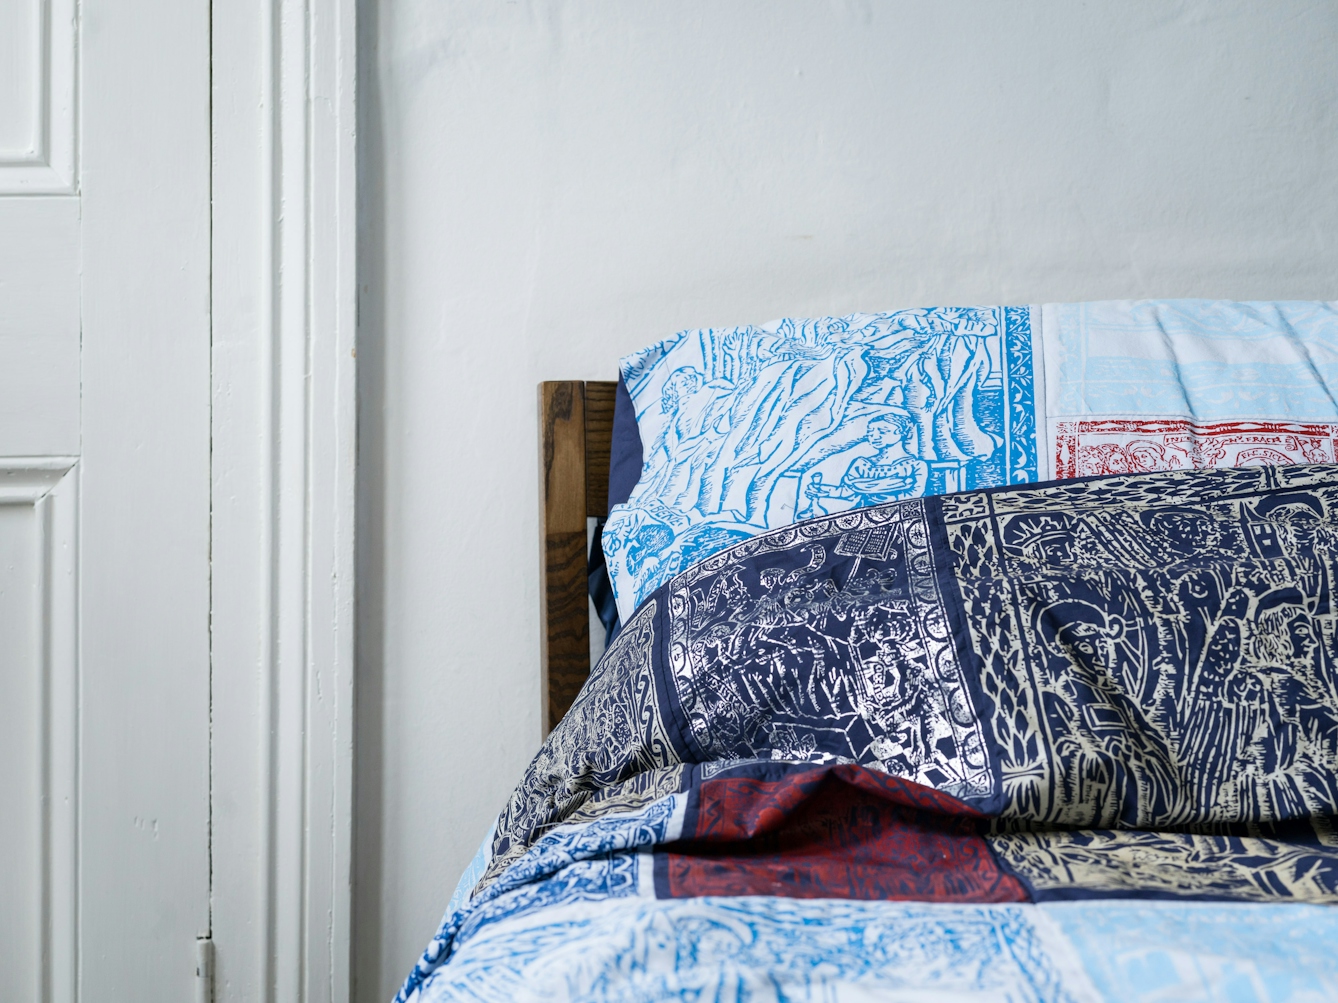 Photograph of a bedroom showing the left hand side of the headboard of a double bed, made up with a duvet cover and pillowcases which are made of a patchwork of blue, red, silver and gold screen-printed designs. To the left of the bed is part of a door. 